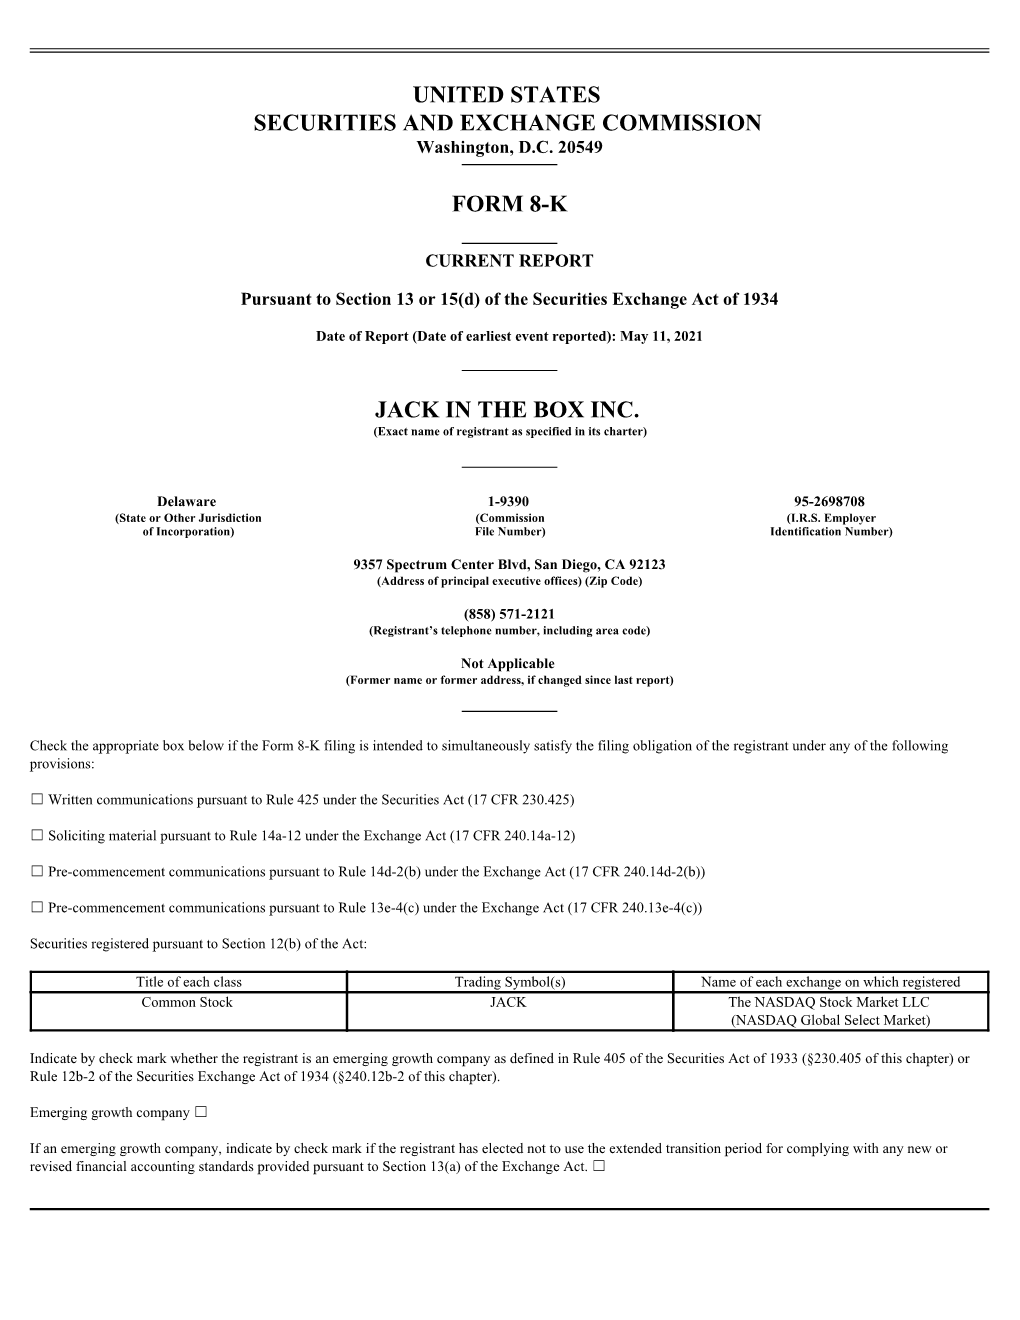 United States Securities and Exchange Commission Form 8-K Jack in the Box Inc